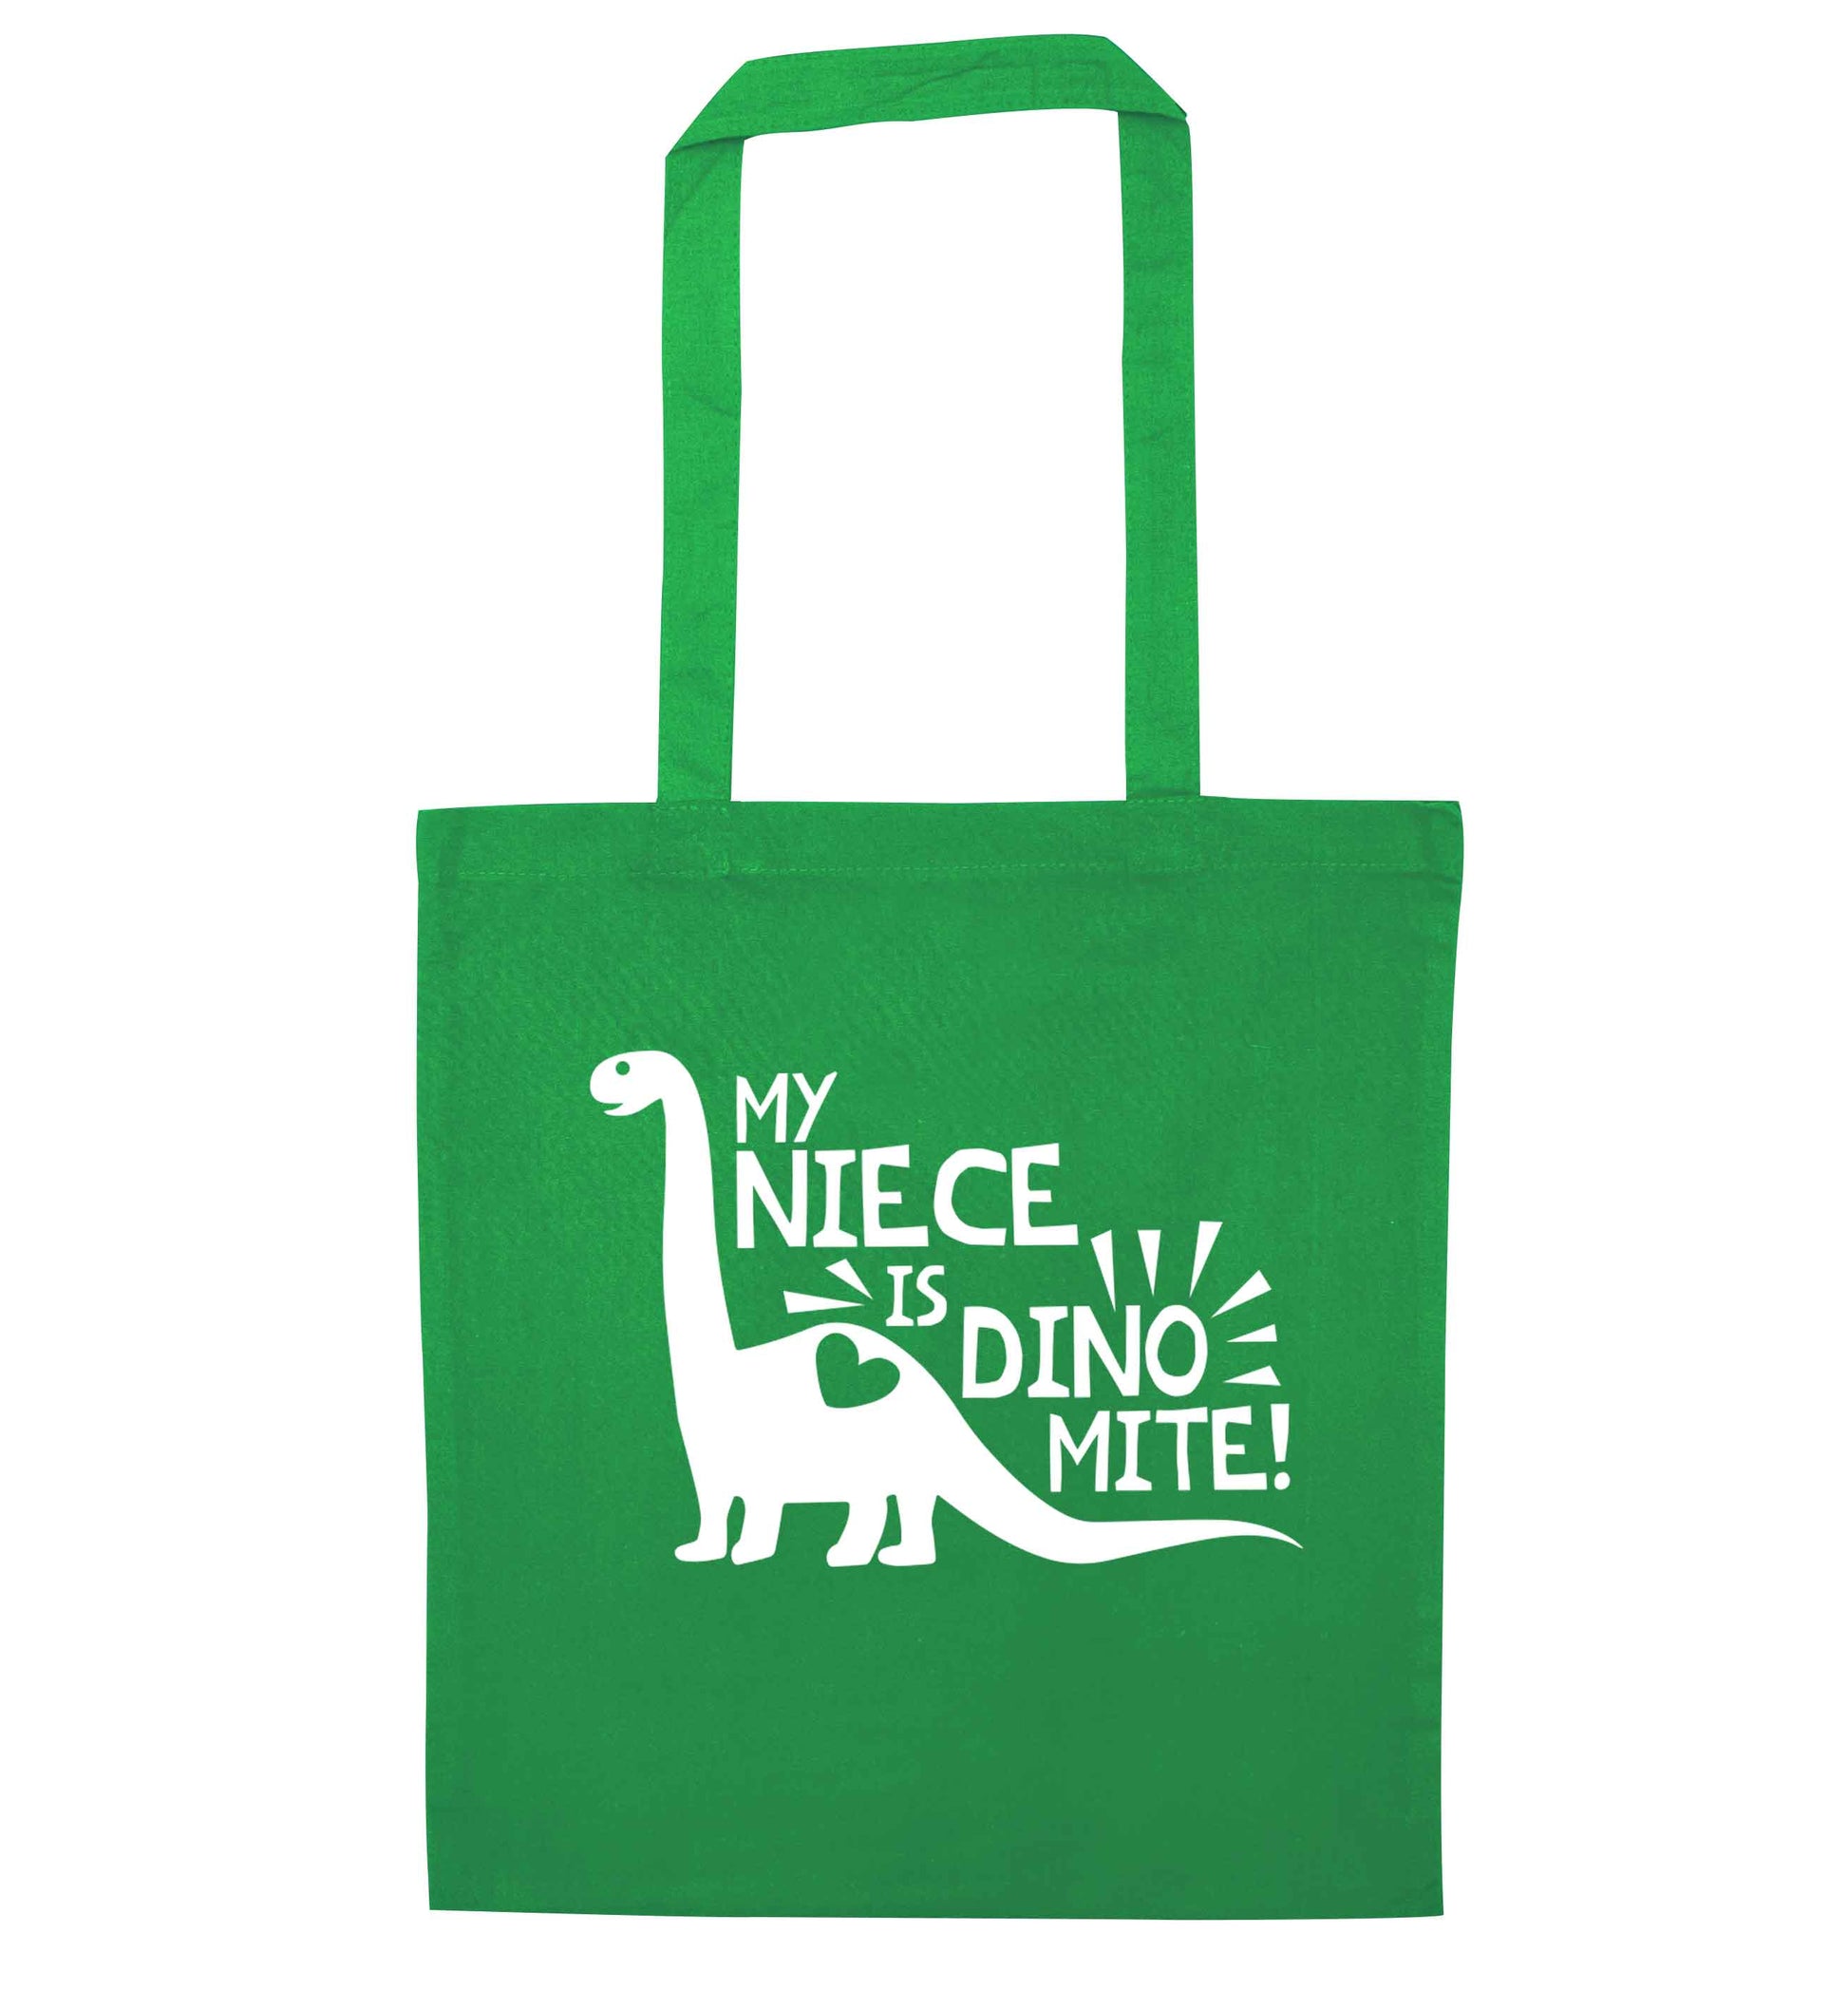 My niece is dinomite! green tote bag